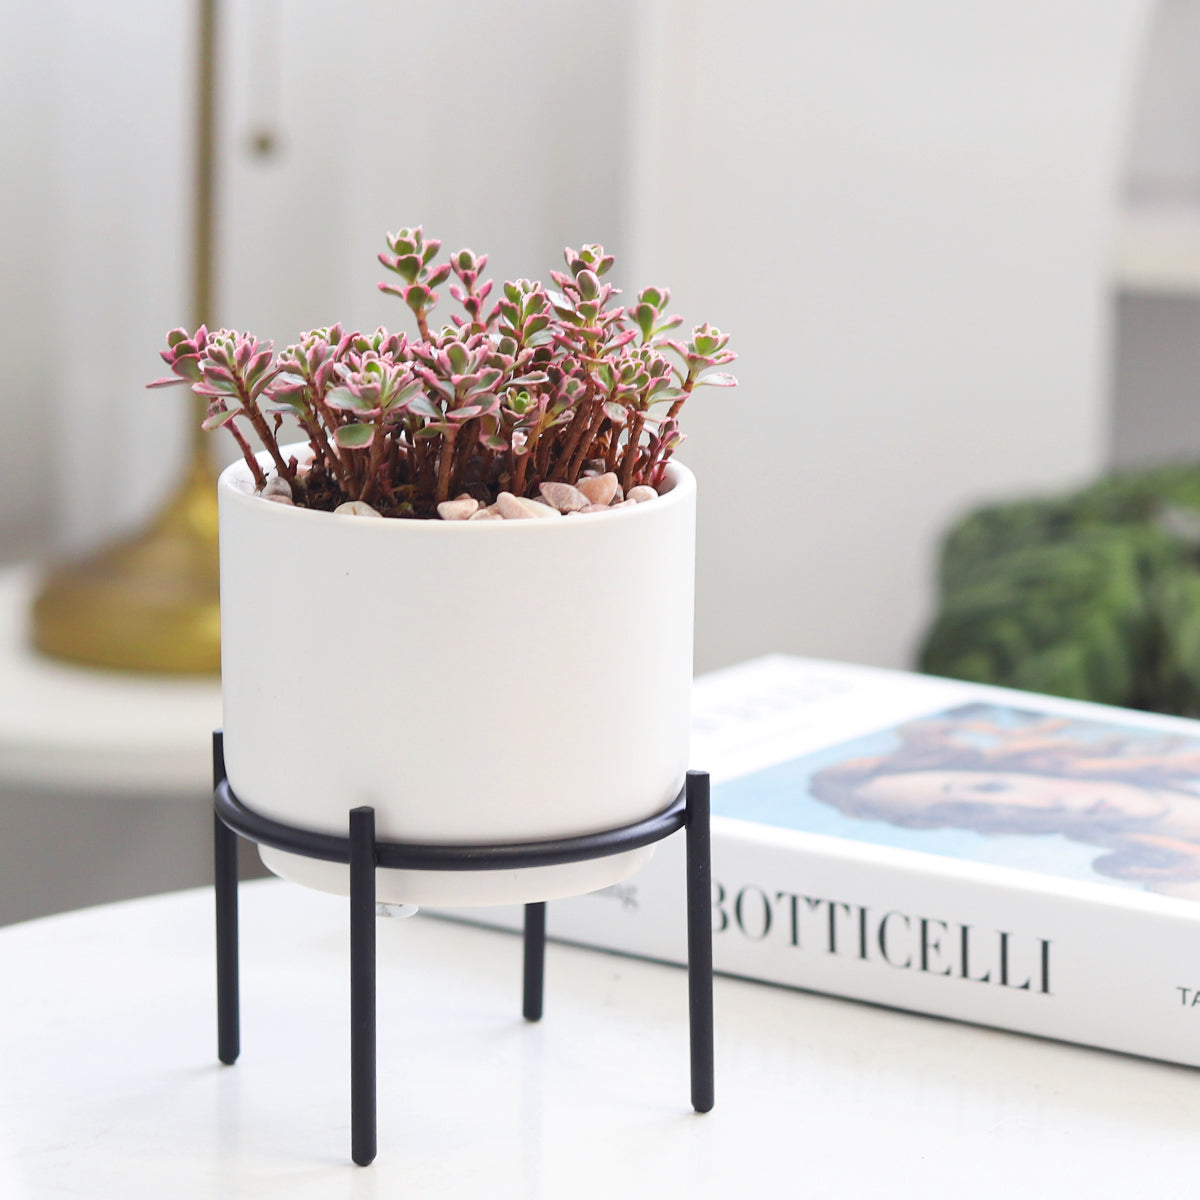 4 inch Solid White Ceramic Planter with Metal Stand - Pot with Stand by Succulents Box